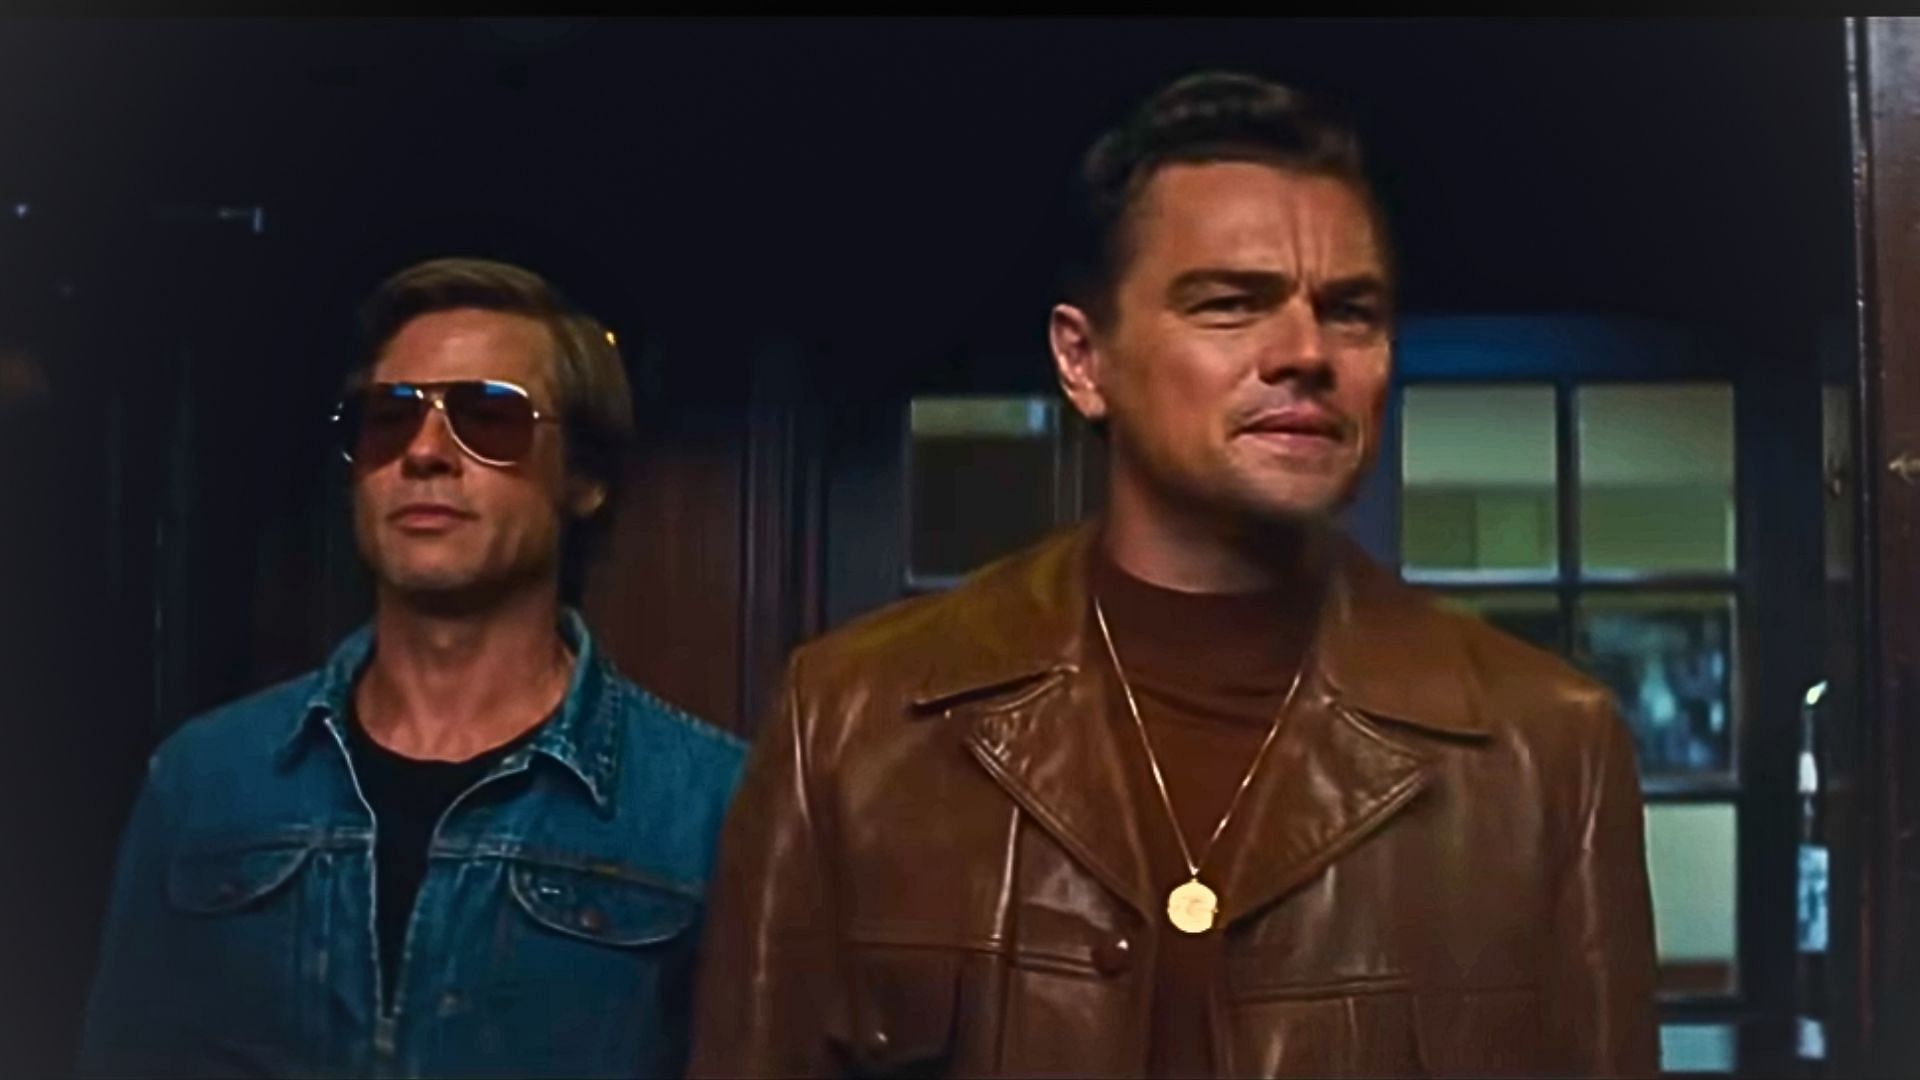 Brad Pitt and Leonardo DiCaprio in Once Upon a Time in Hollywood (Image via YouTube/Sony Pictures Entertainment)